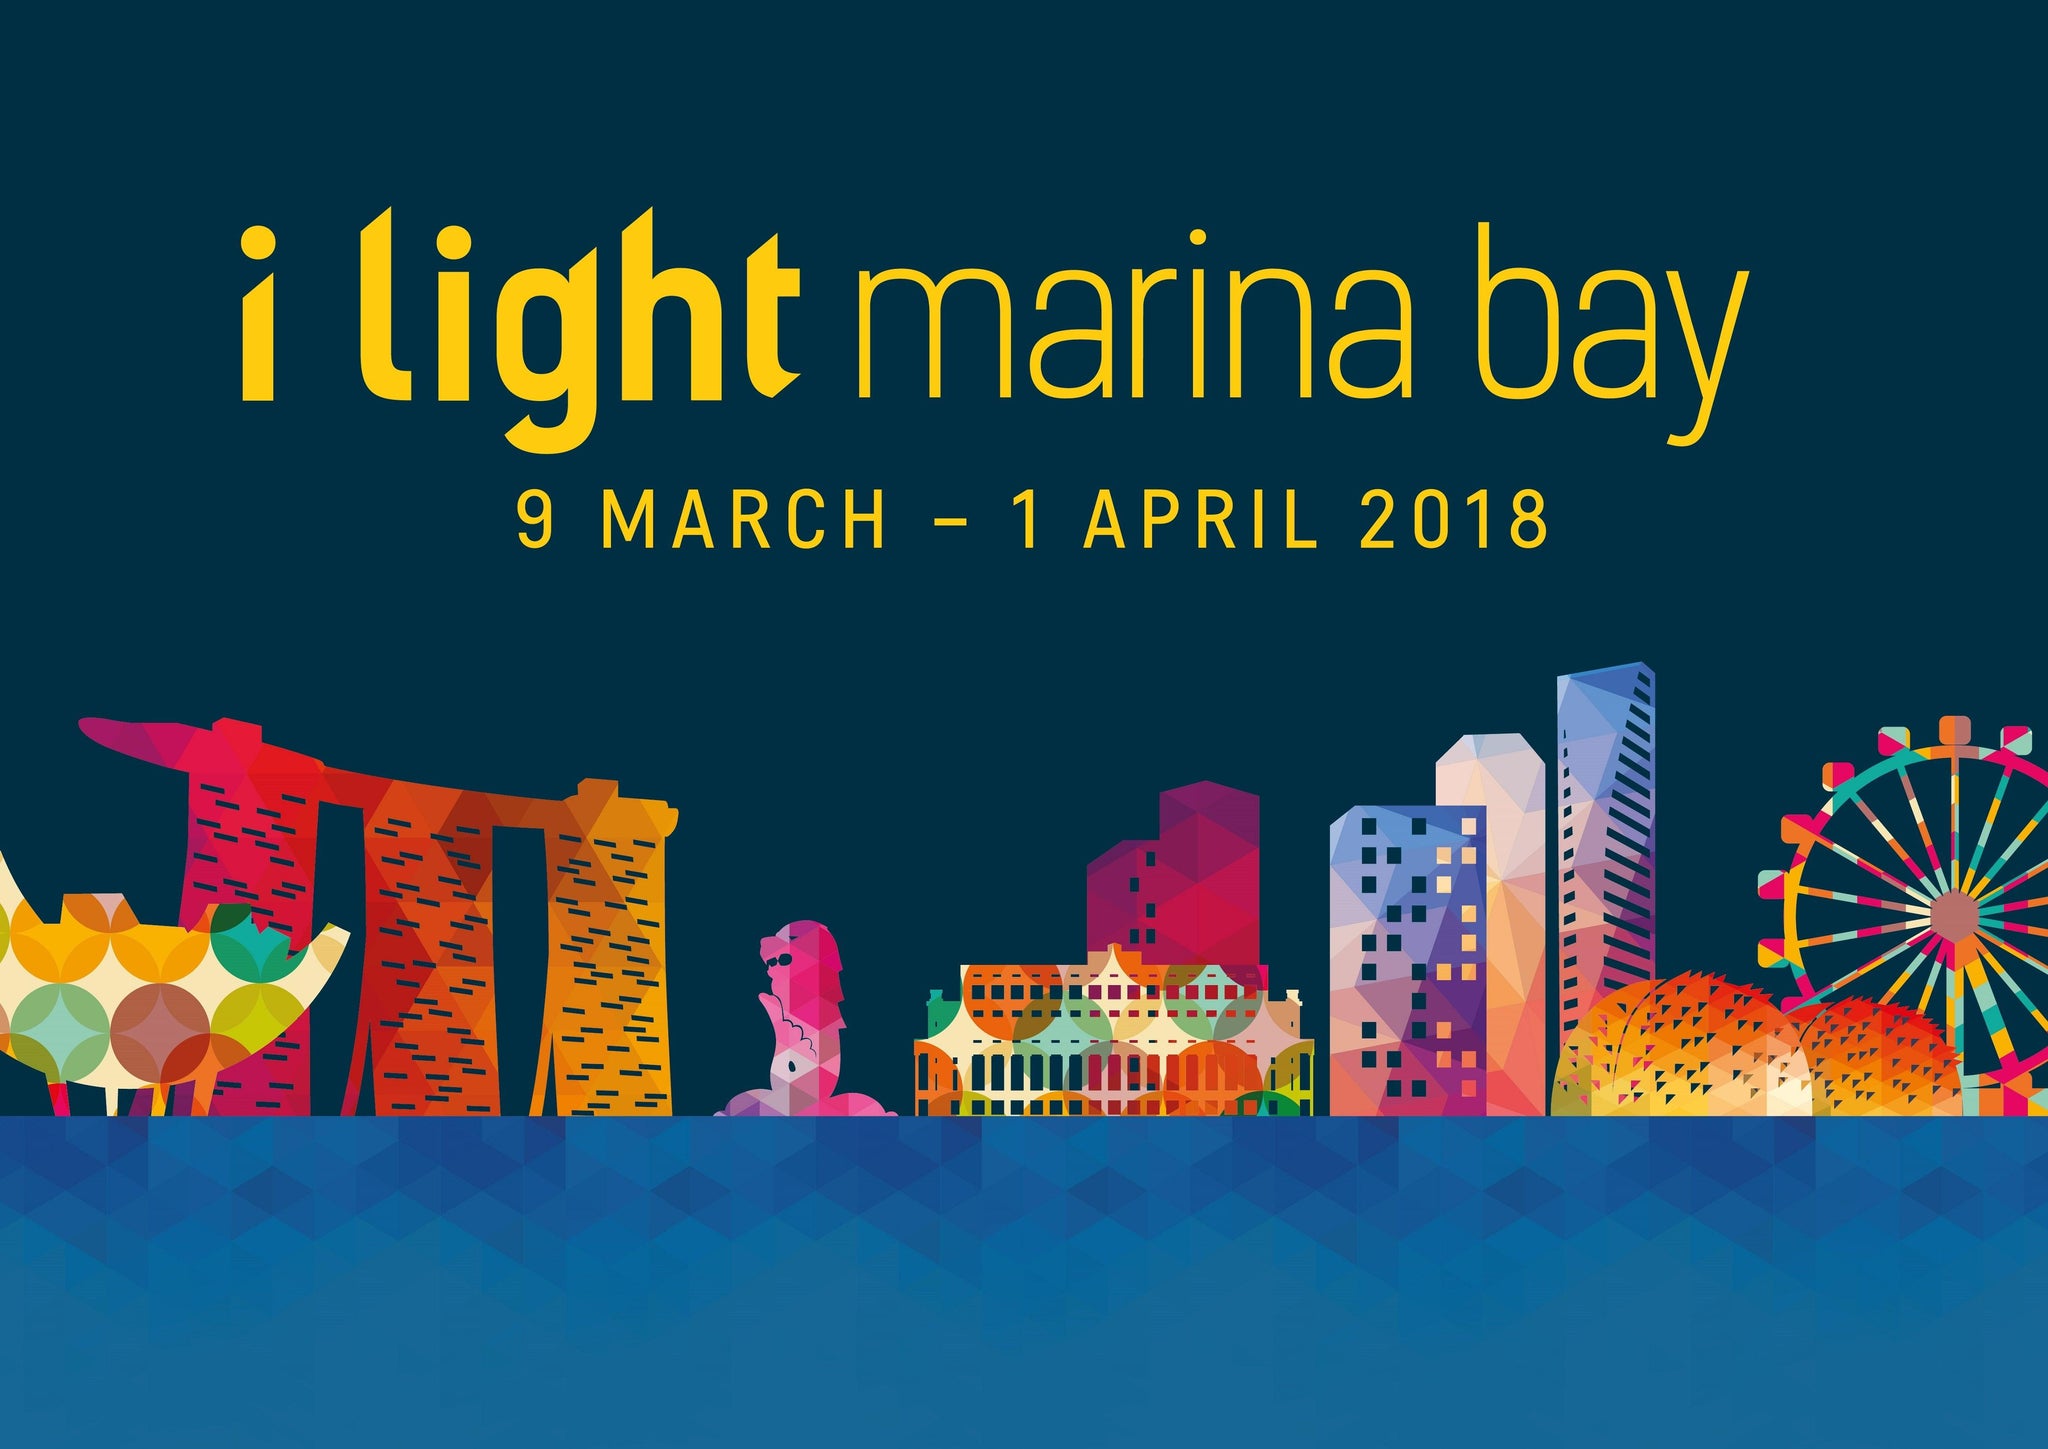 Things to do this weekend (Coming Up) - i Light Marina Bay 2018: What's for the LOs?